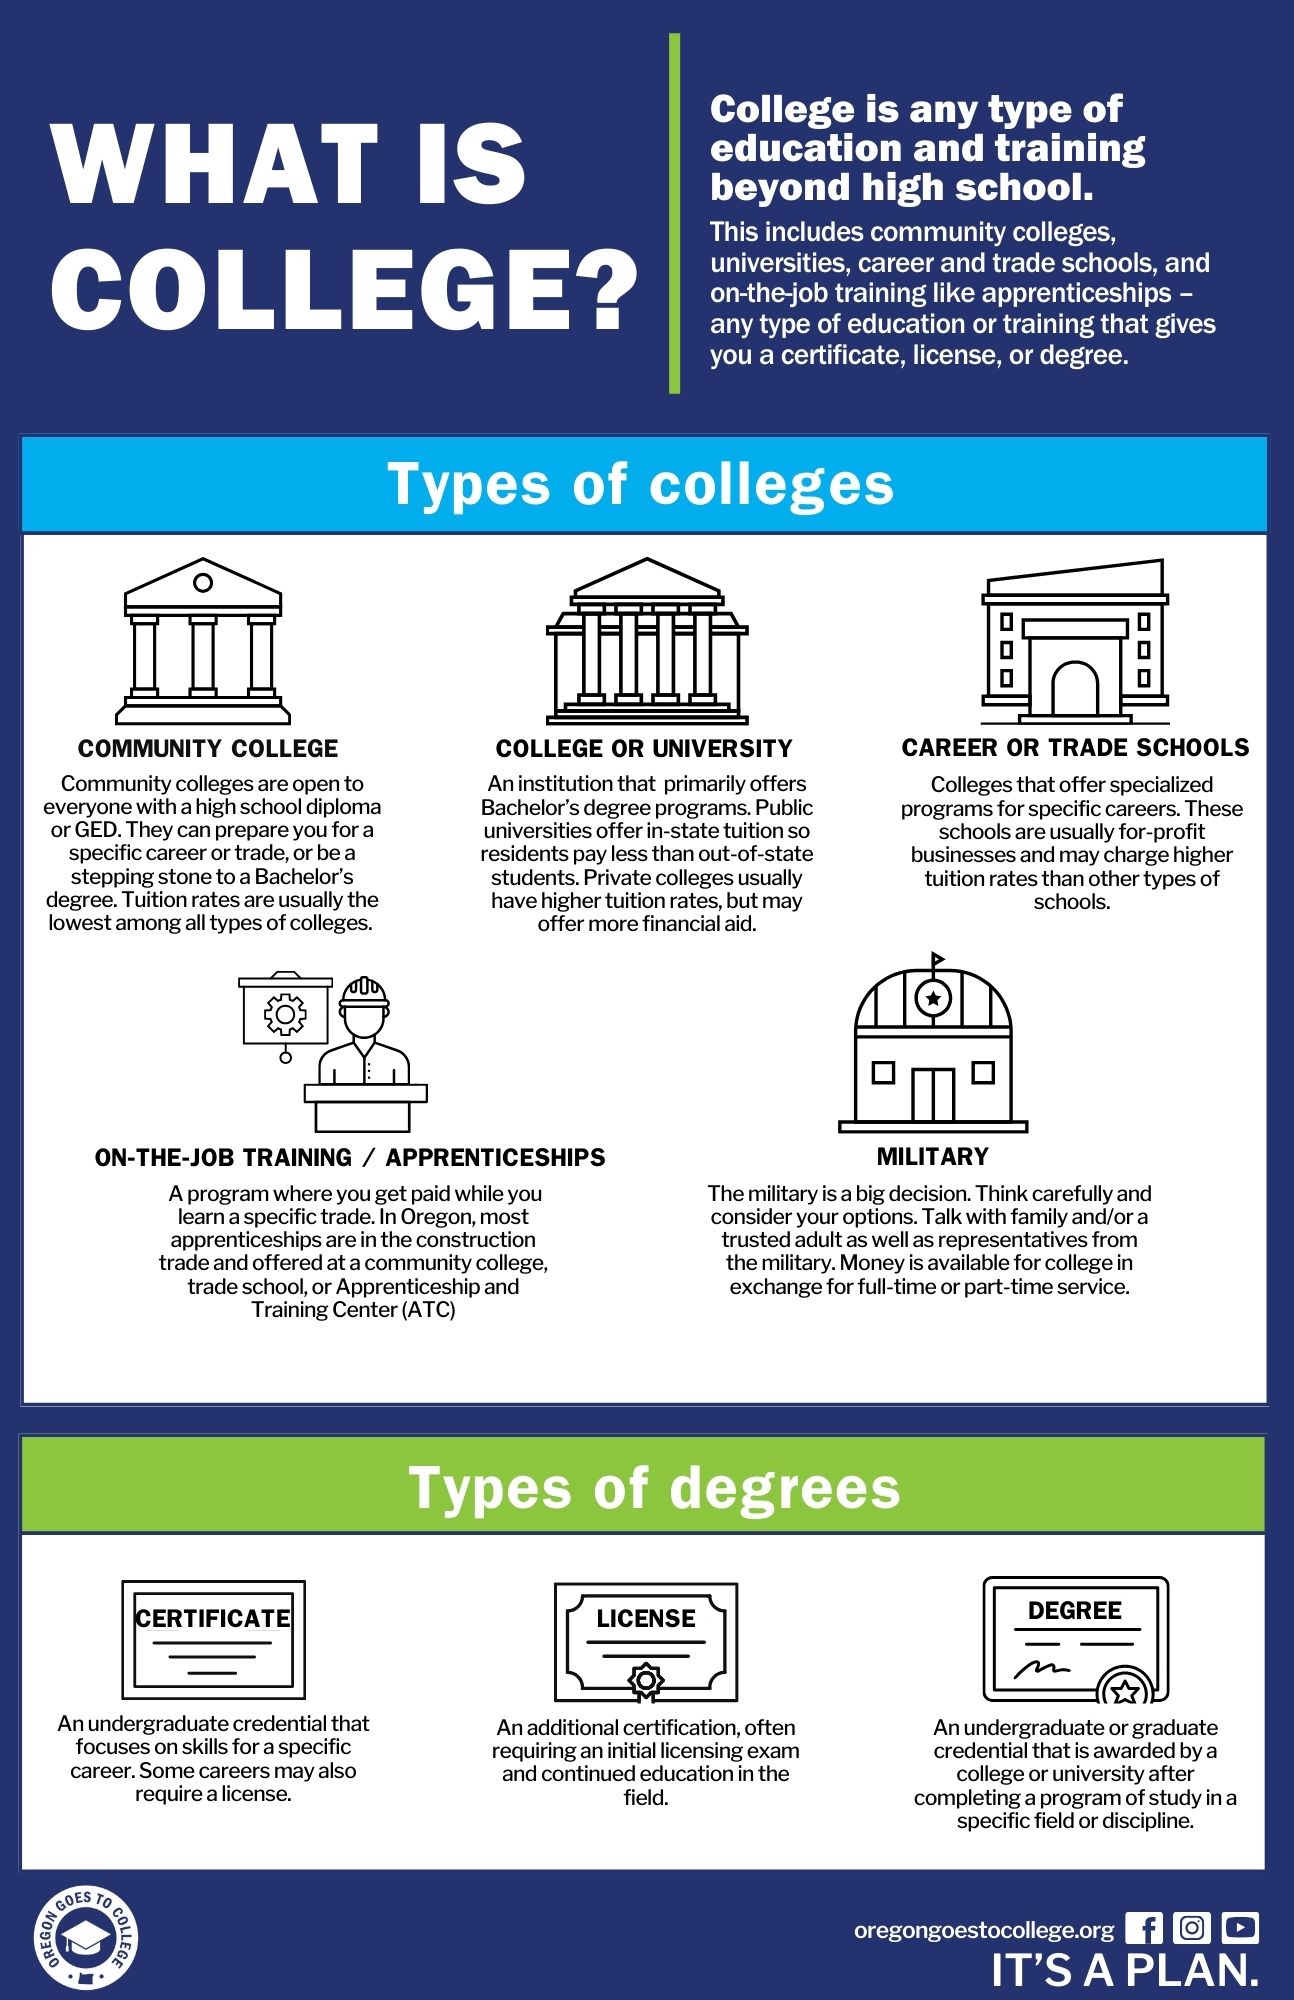 An 11" x 17" poster with the different types of colleges and degrees.